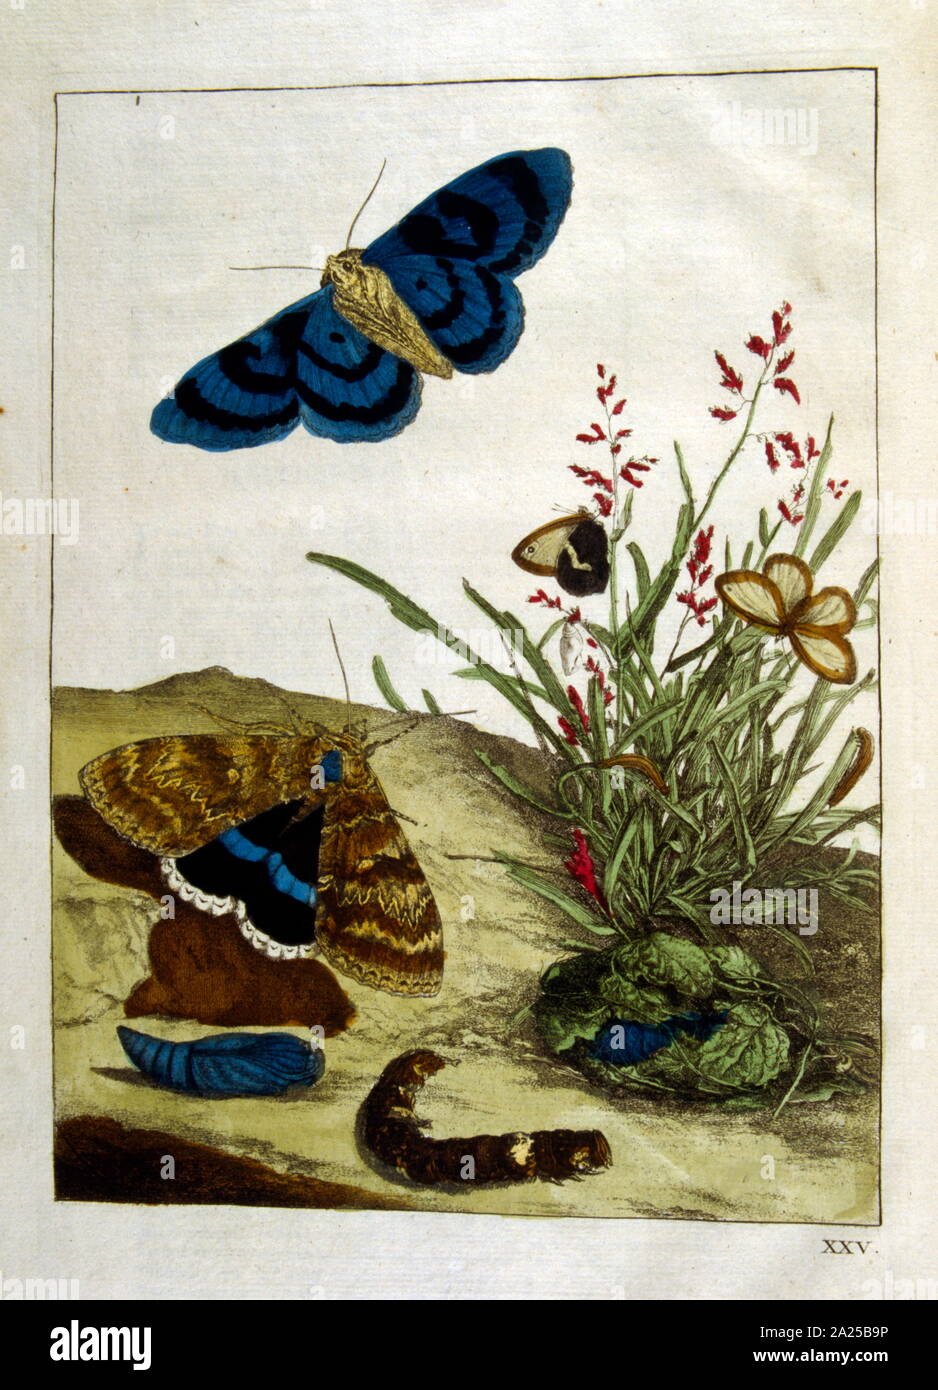 Illustration from the Dutch, botanical book, 'Naauwkeurige waarneemingen' (Accurate observations), by L'Admiral, Jacob ca. 1774 Stock Photo